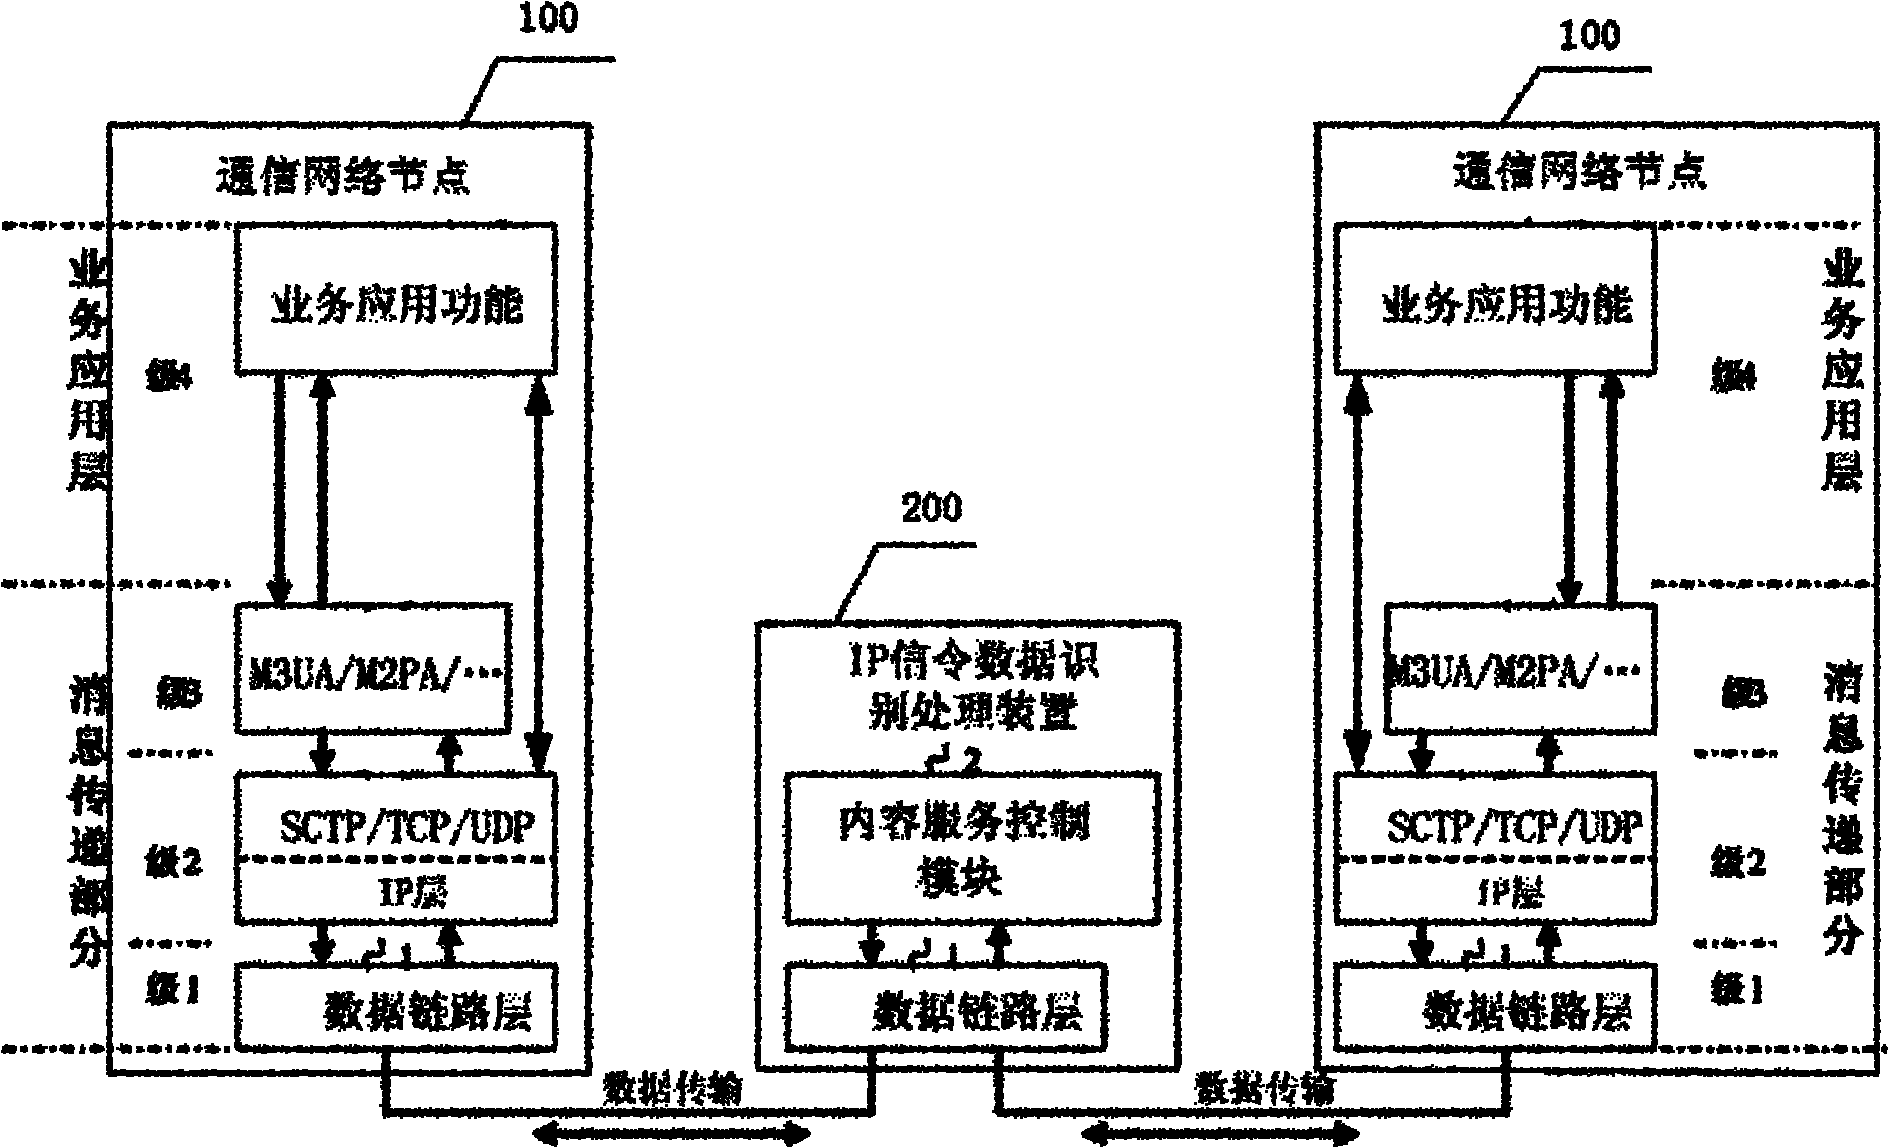 Recognition processing method and device for signaling data on IP data link function layer